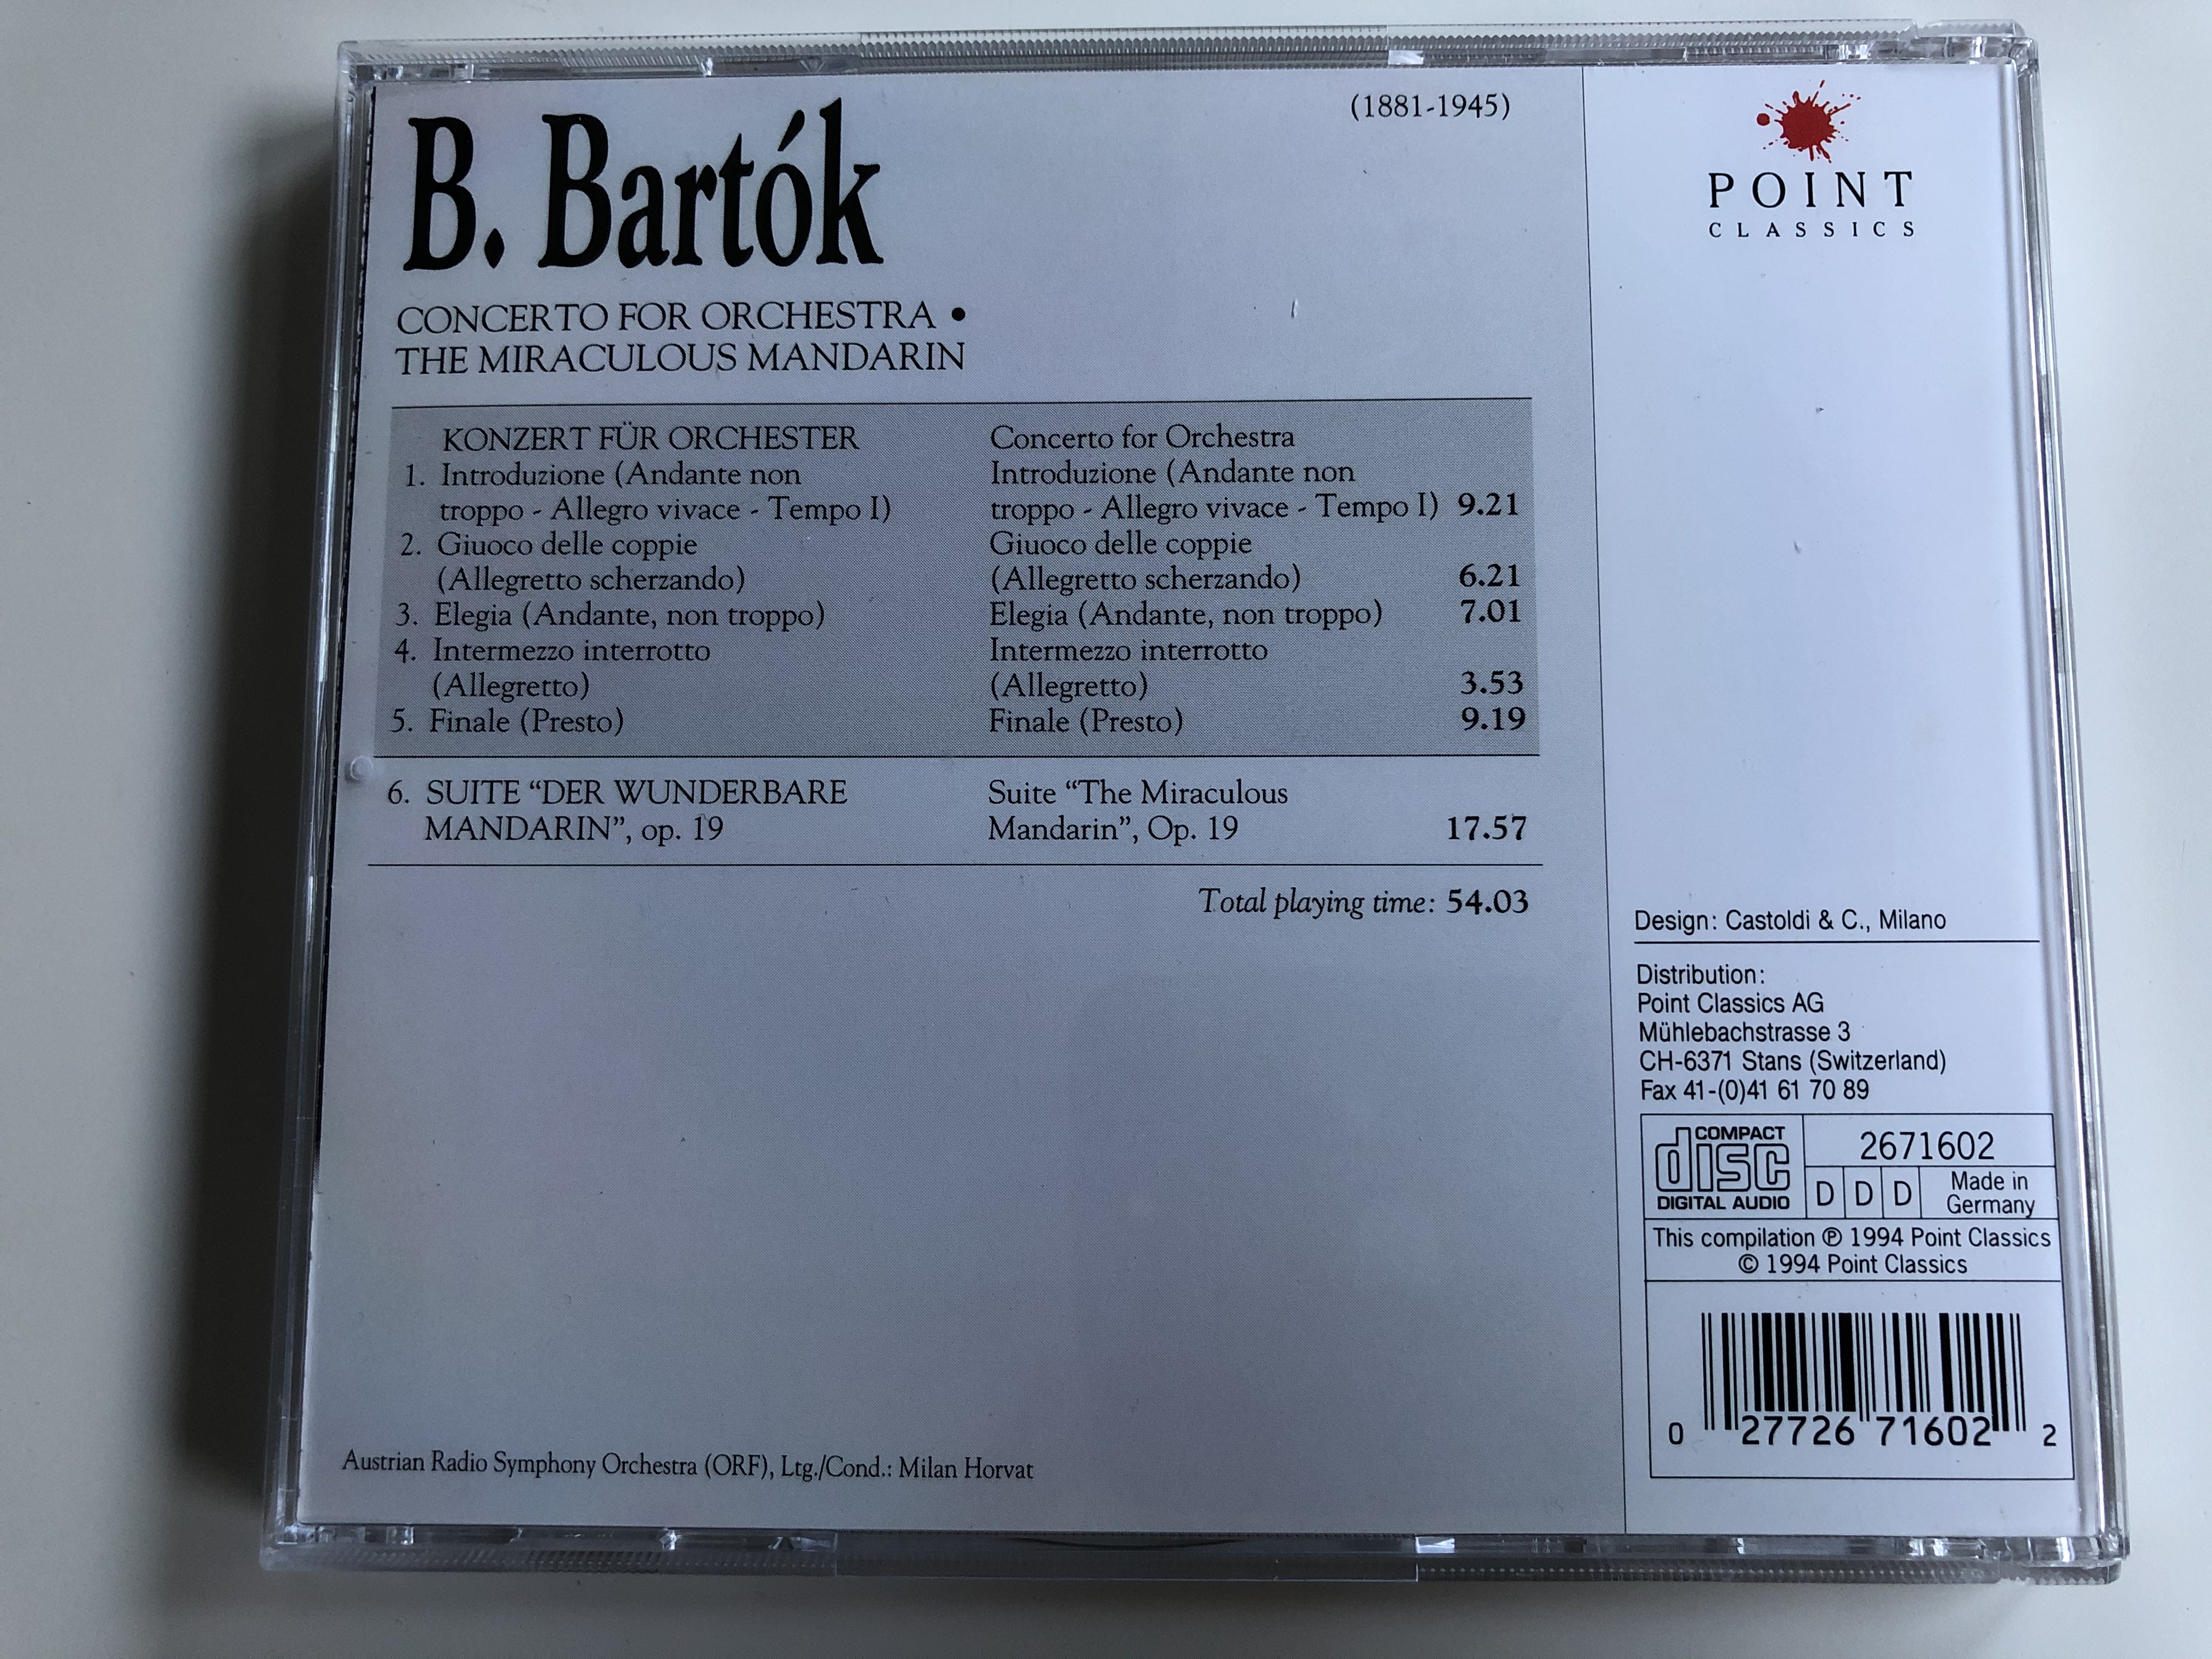 bart-k-concerto-for-orchestra-the-miraculous-mandarin-austrian-radio-symphony-orchestra-orf-conducted-milan-horvat-point-classics-audio-cd-1994-2671602-4-.jpg